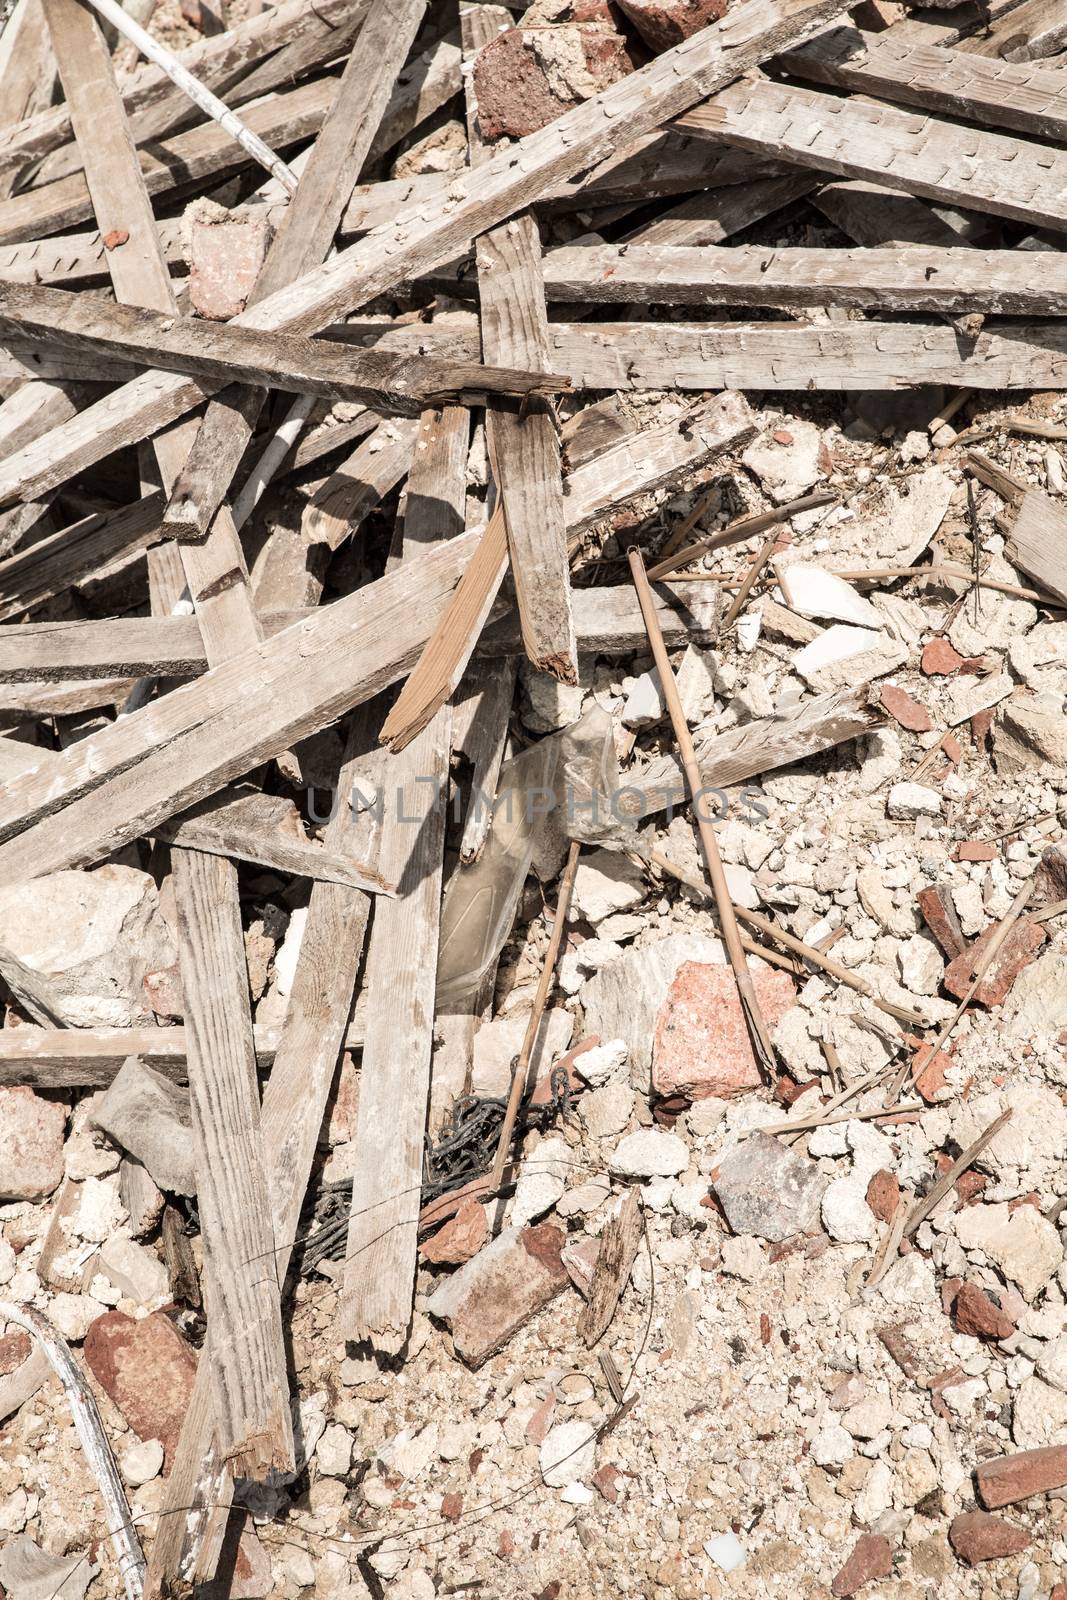 Wooden planks of a demolished house.